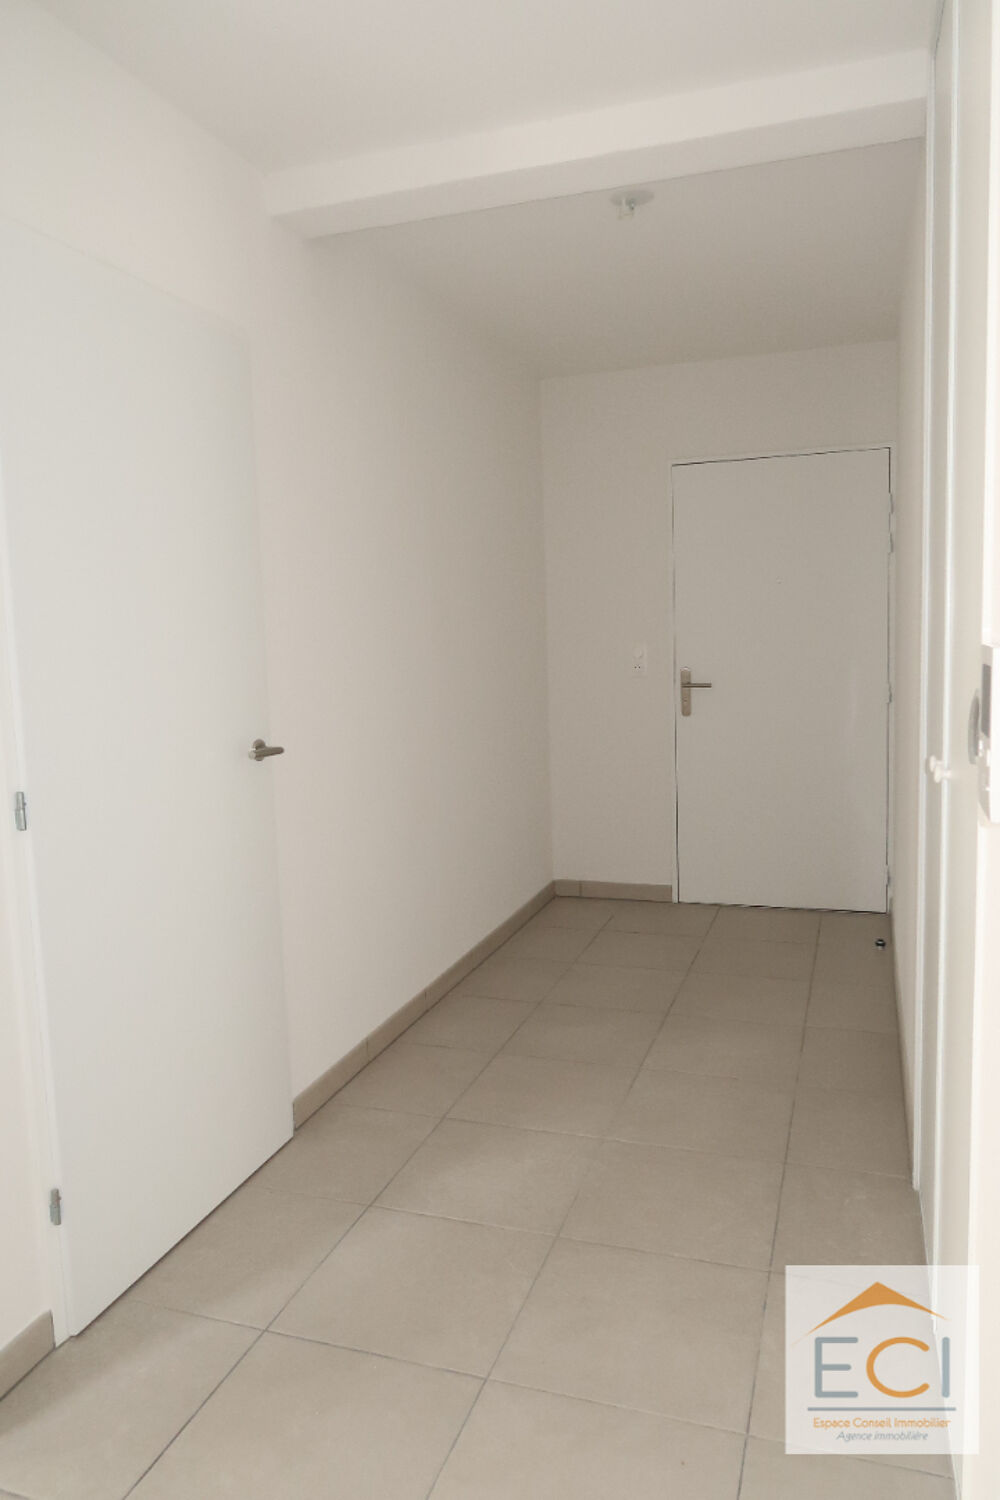 Location Appartement Appartement 3 pices - Proche Mairie Limoges